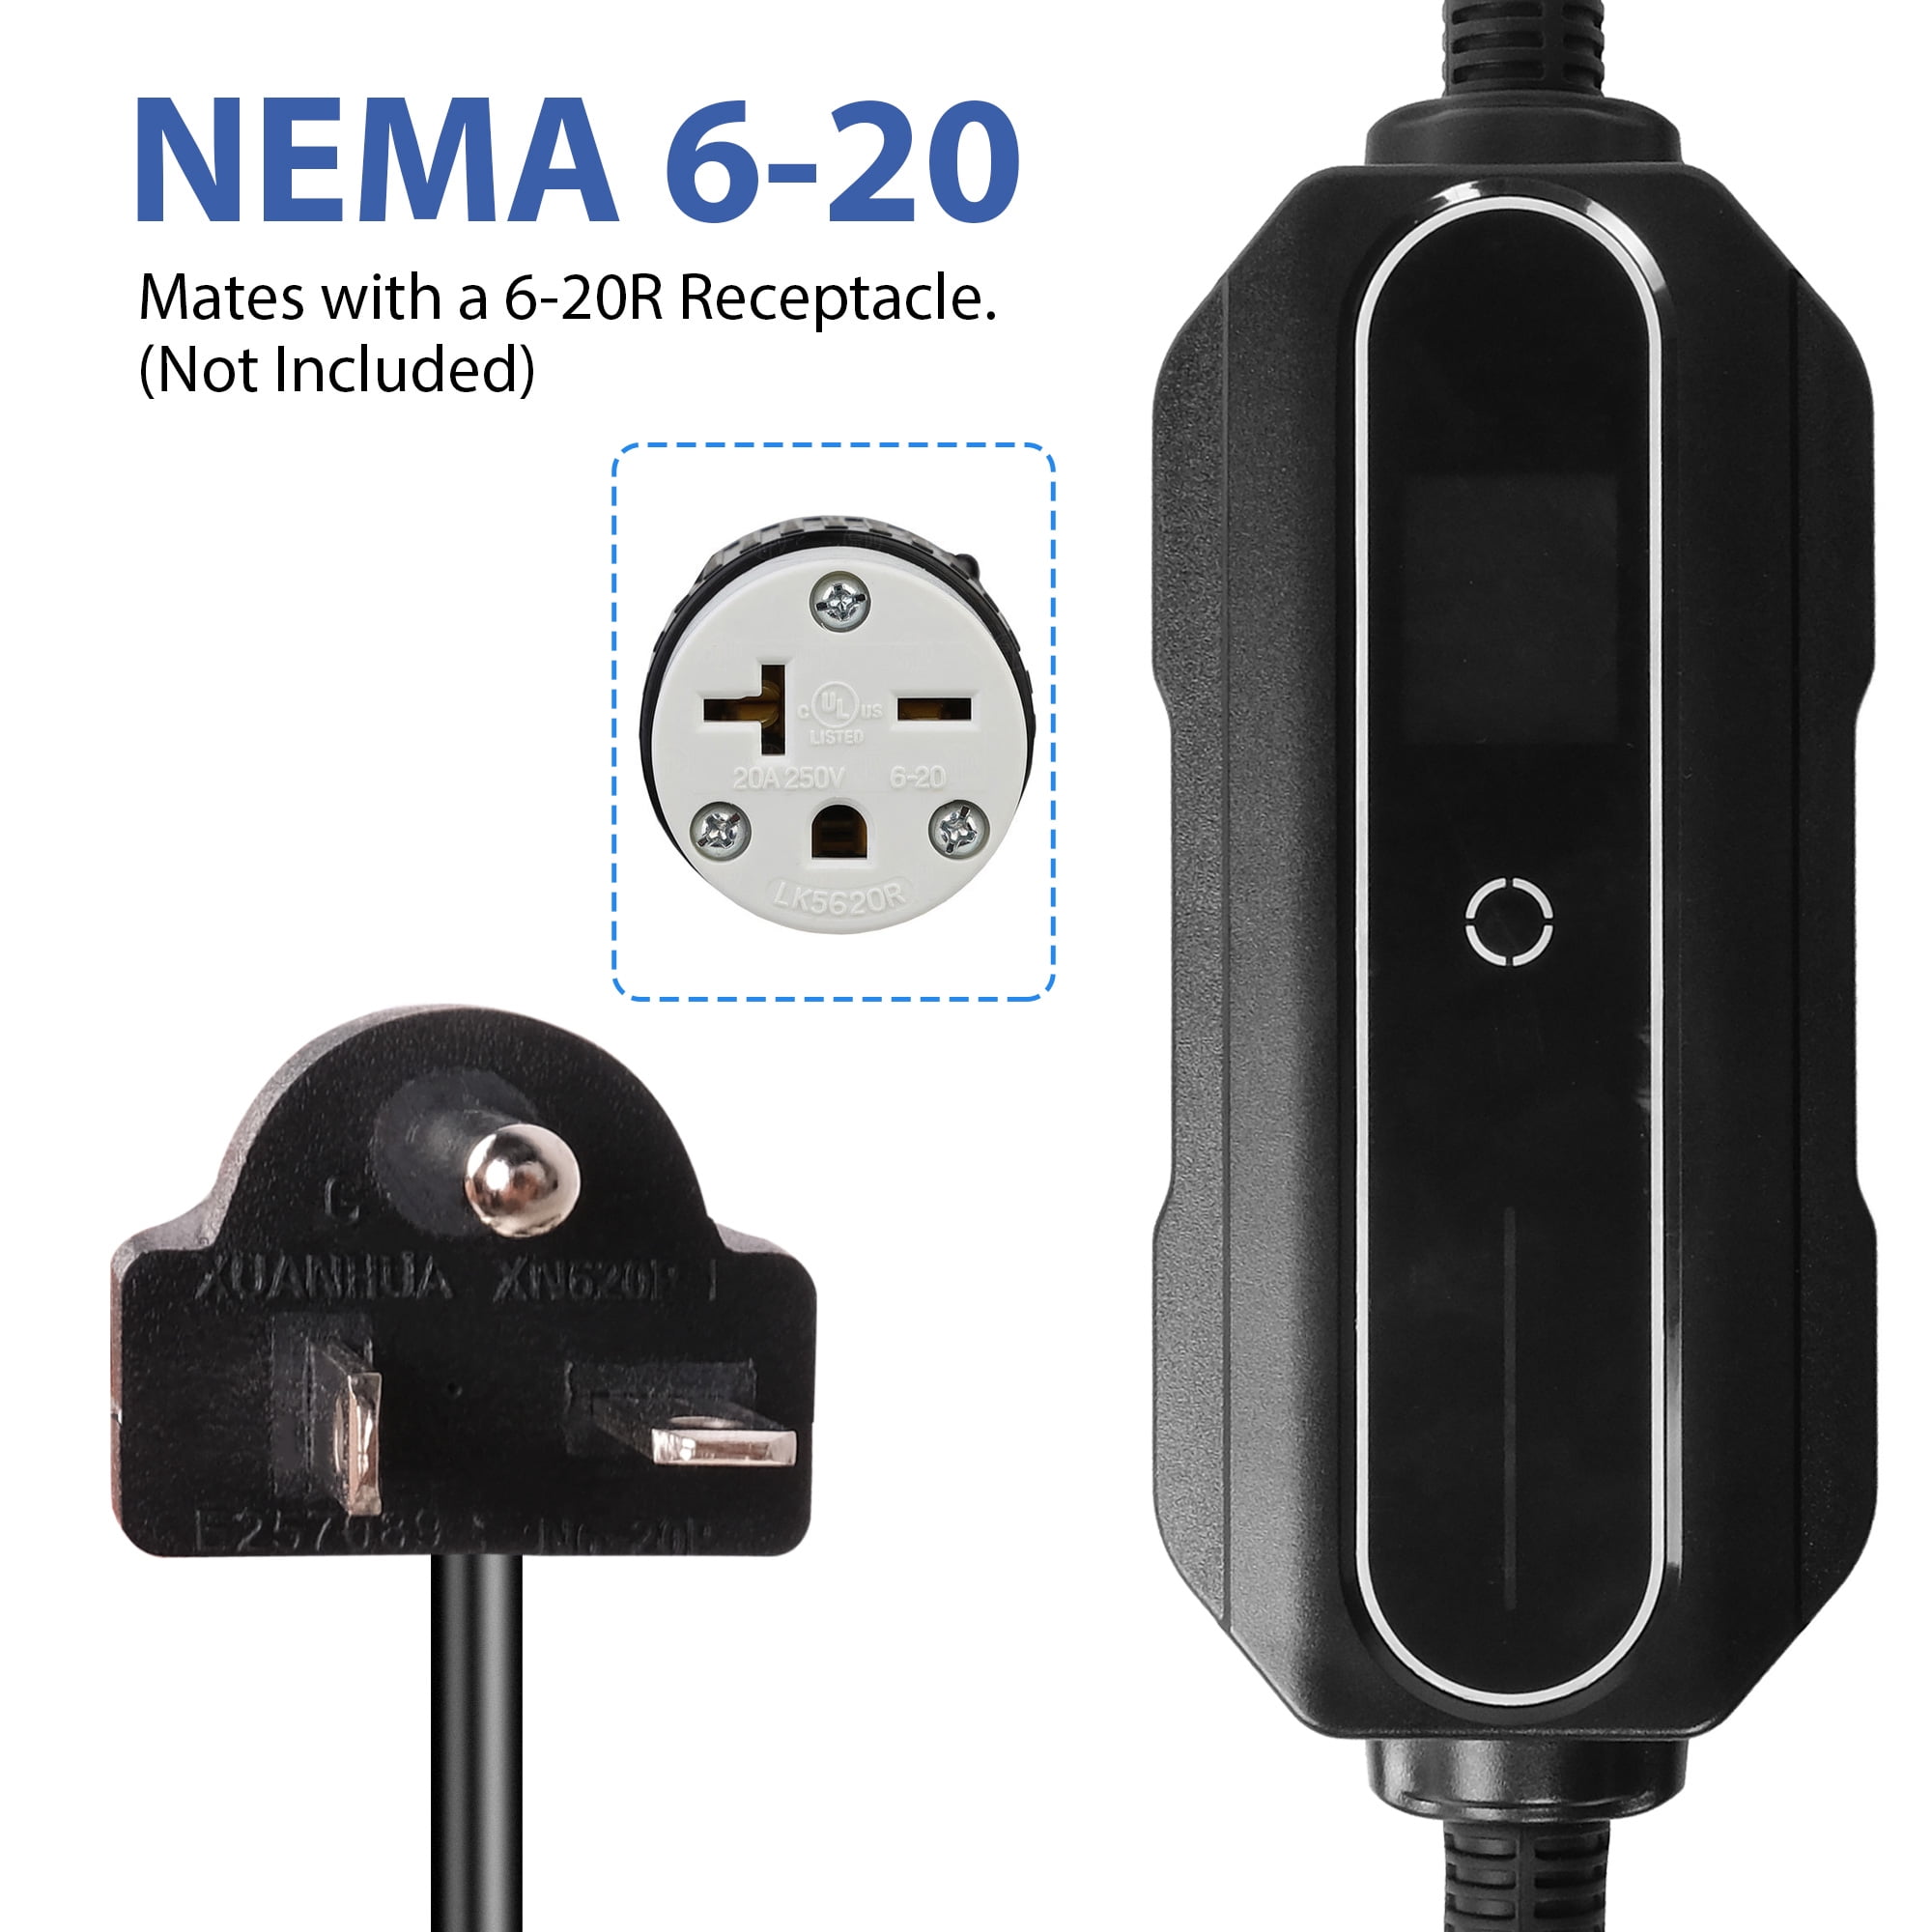 Level 1-2 EV Charger,J1772 Standard Plug-in Home EV Charging Station for  Electric Cars，110V-240V 16 Amp 3.5 kW, Portable Electric Vehicle Charger  with 25 ft Charging Cable NEMA 6-20 Plug: Buy Level 1-2